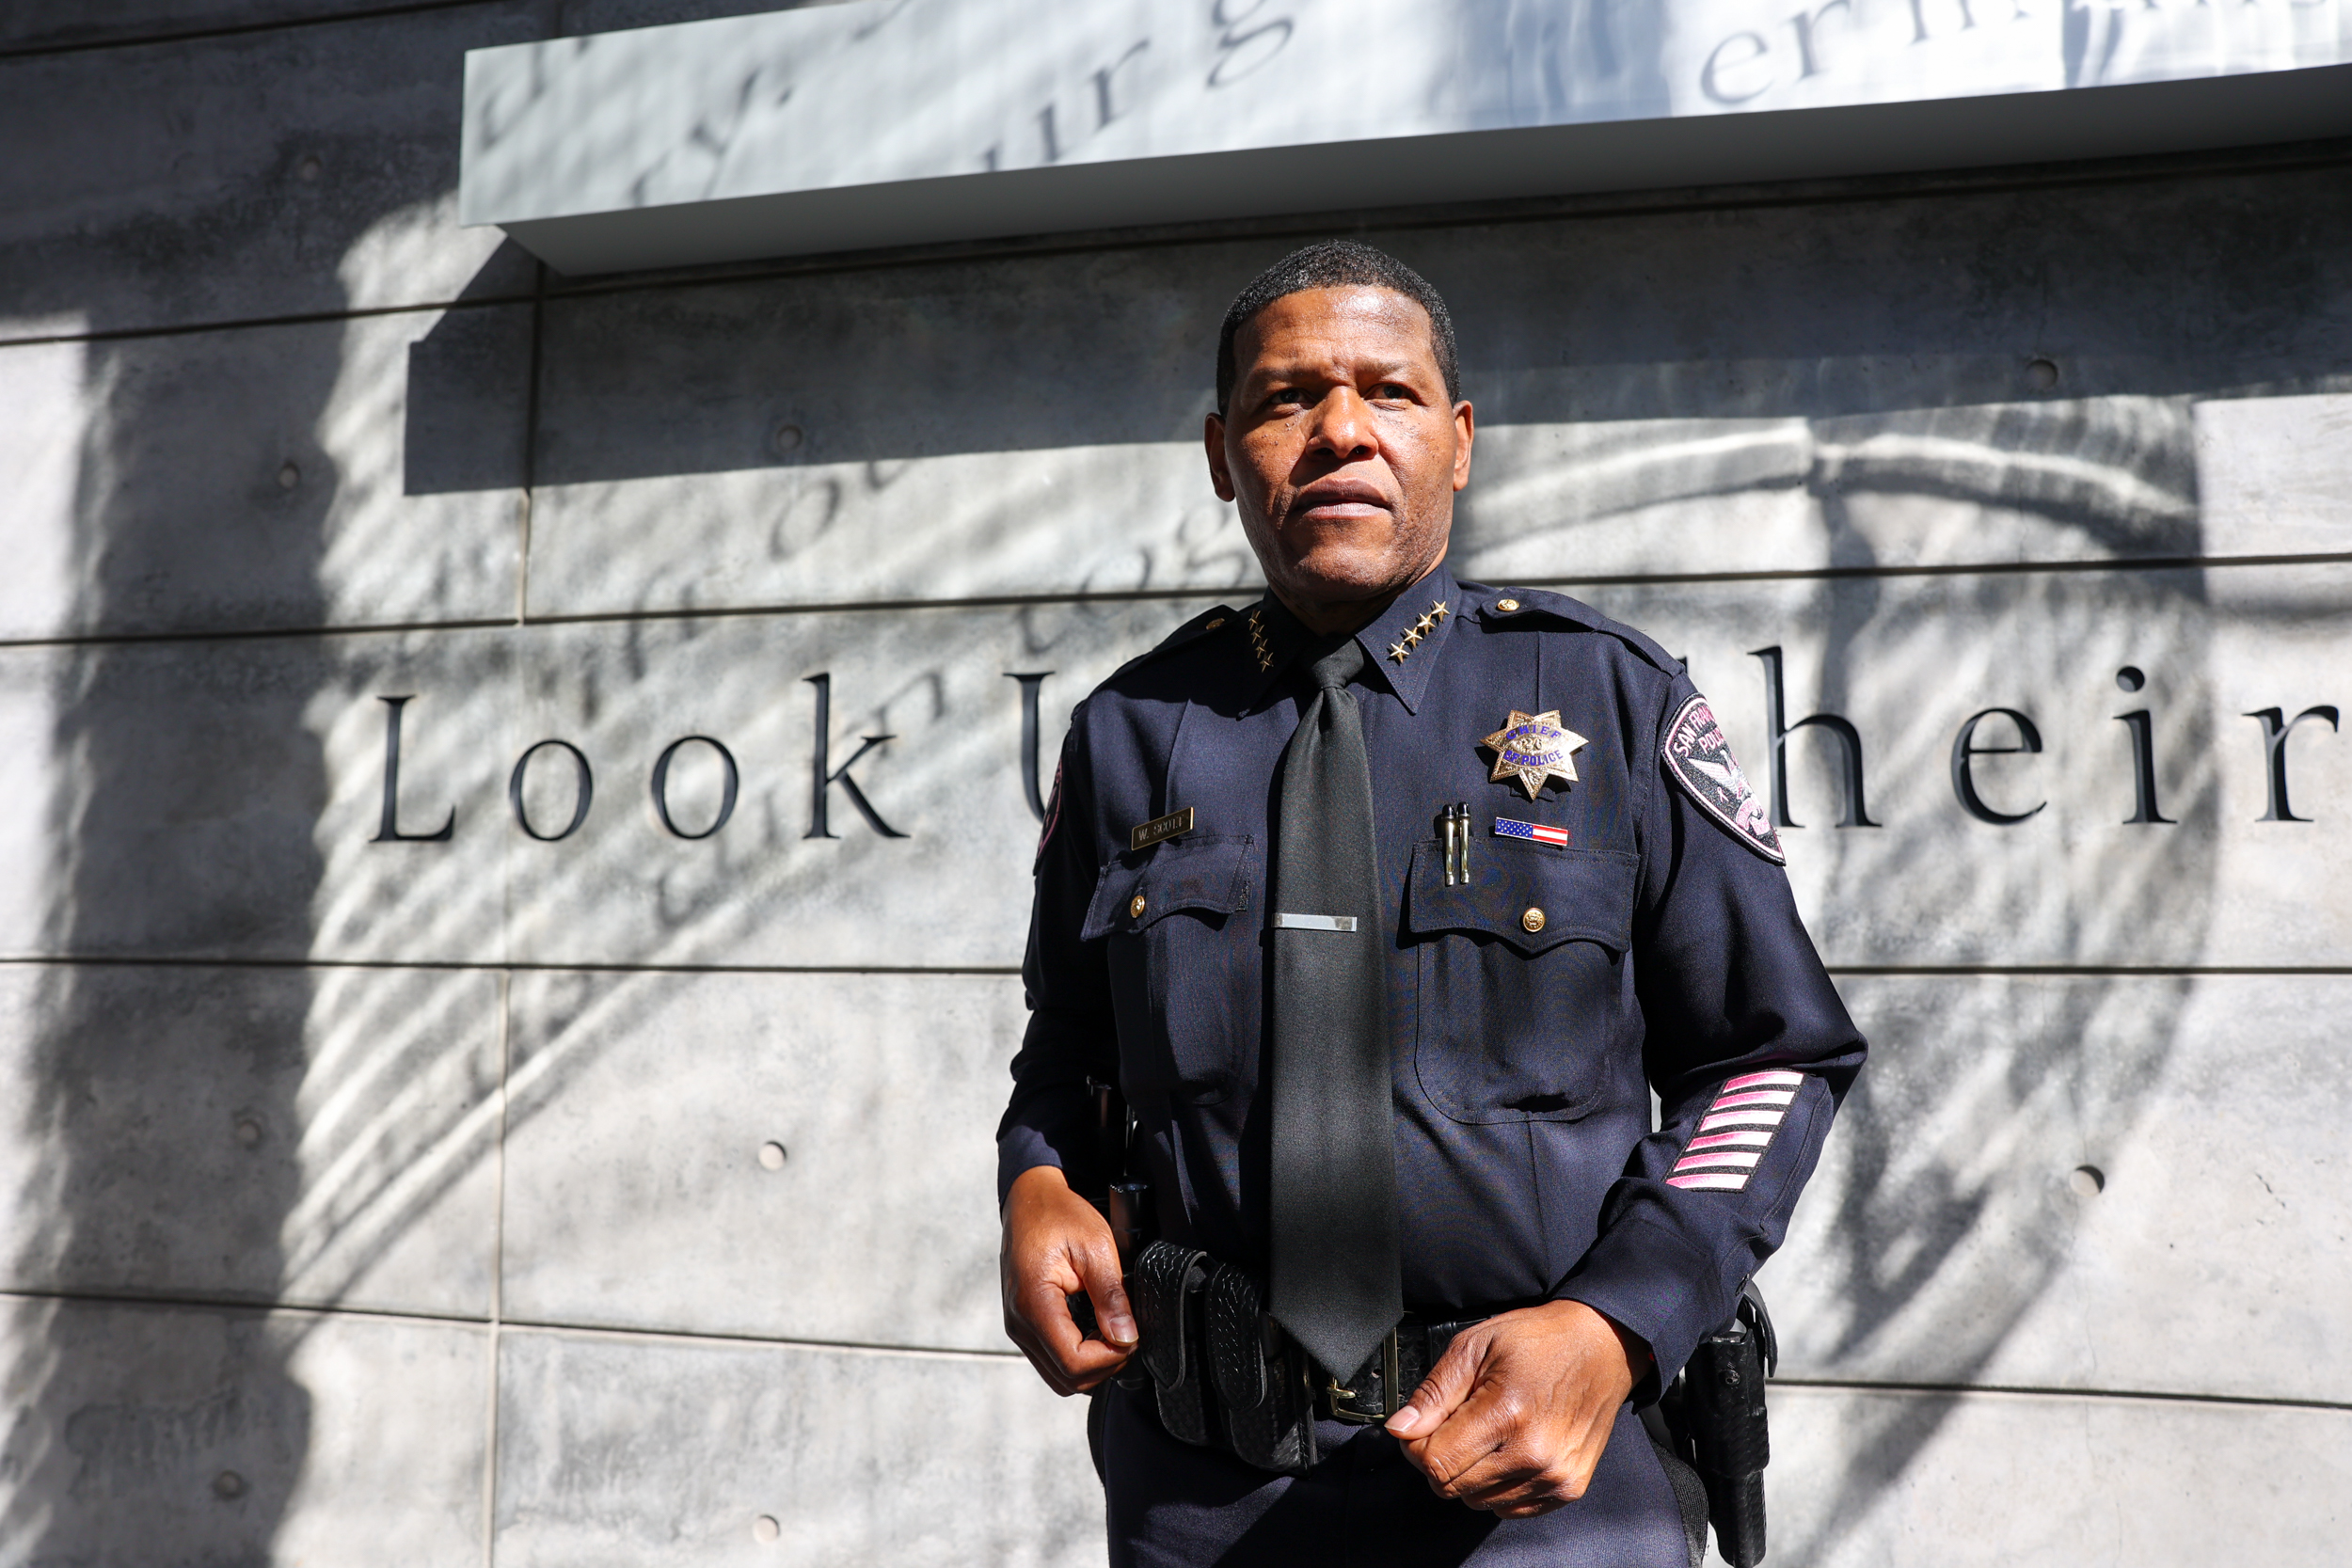 San Francisco Police Chief William “Bill” Scott poses for a portrait in the SFPD headquarters at 1251 3rd Street, San Francisco, Calif., on Monday October 3, 2022. | Camille Cohen/The Standard